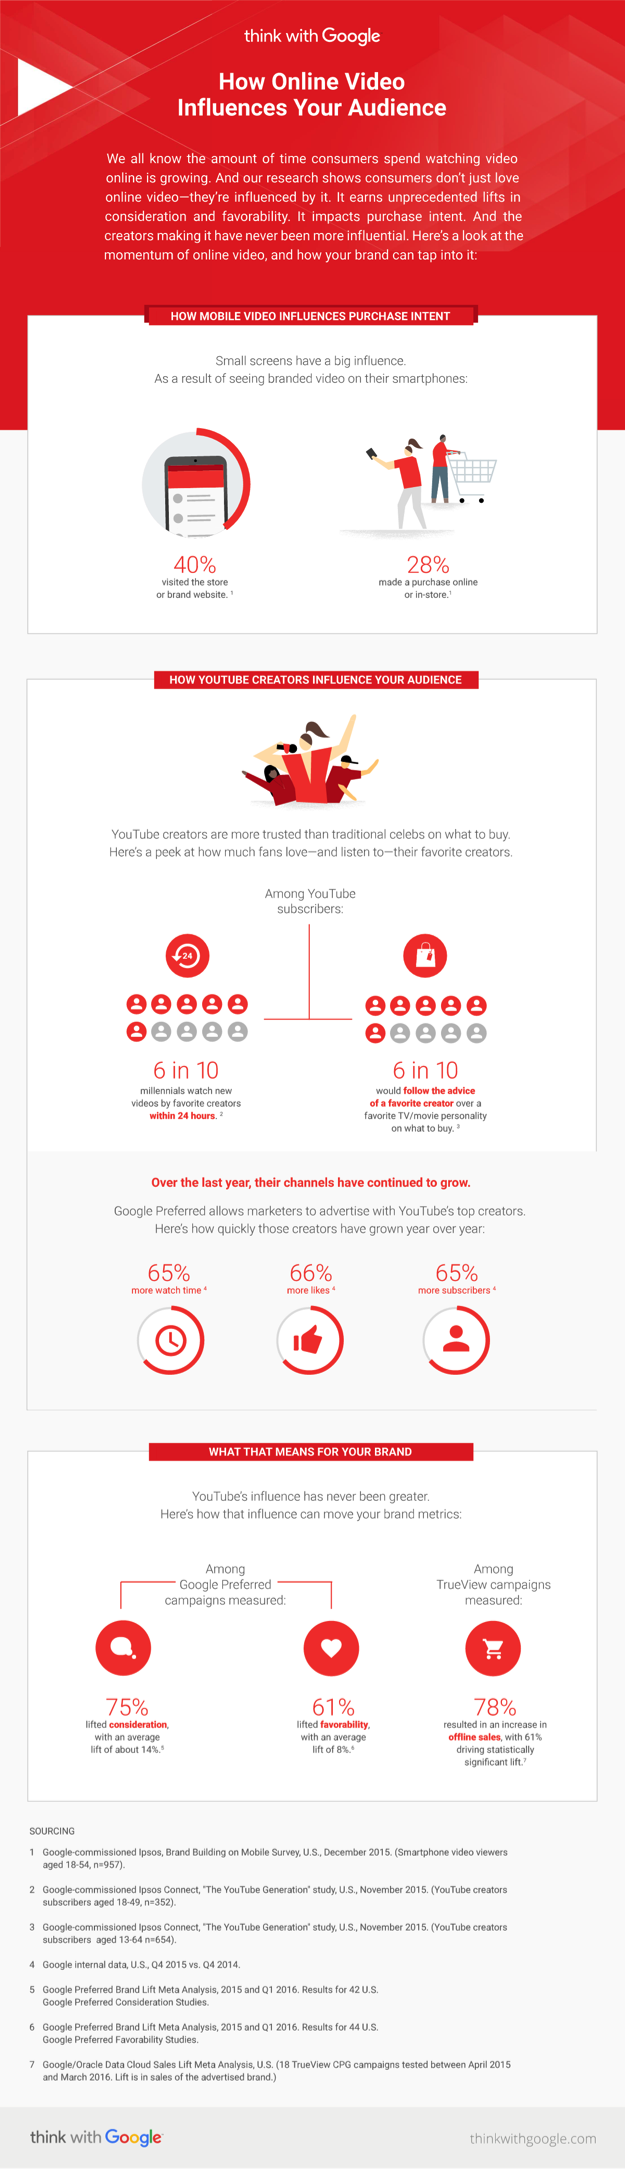 How Online Video Influences Your Audience - #infographic